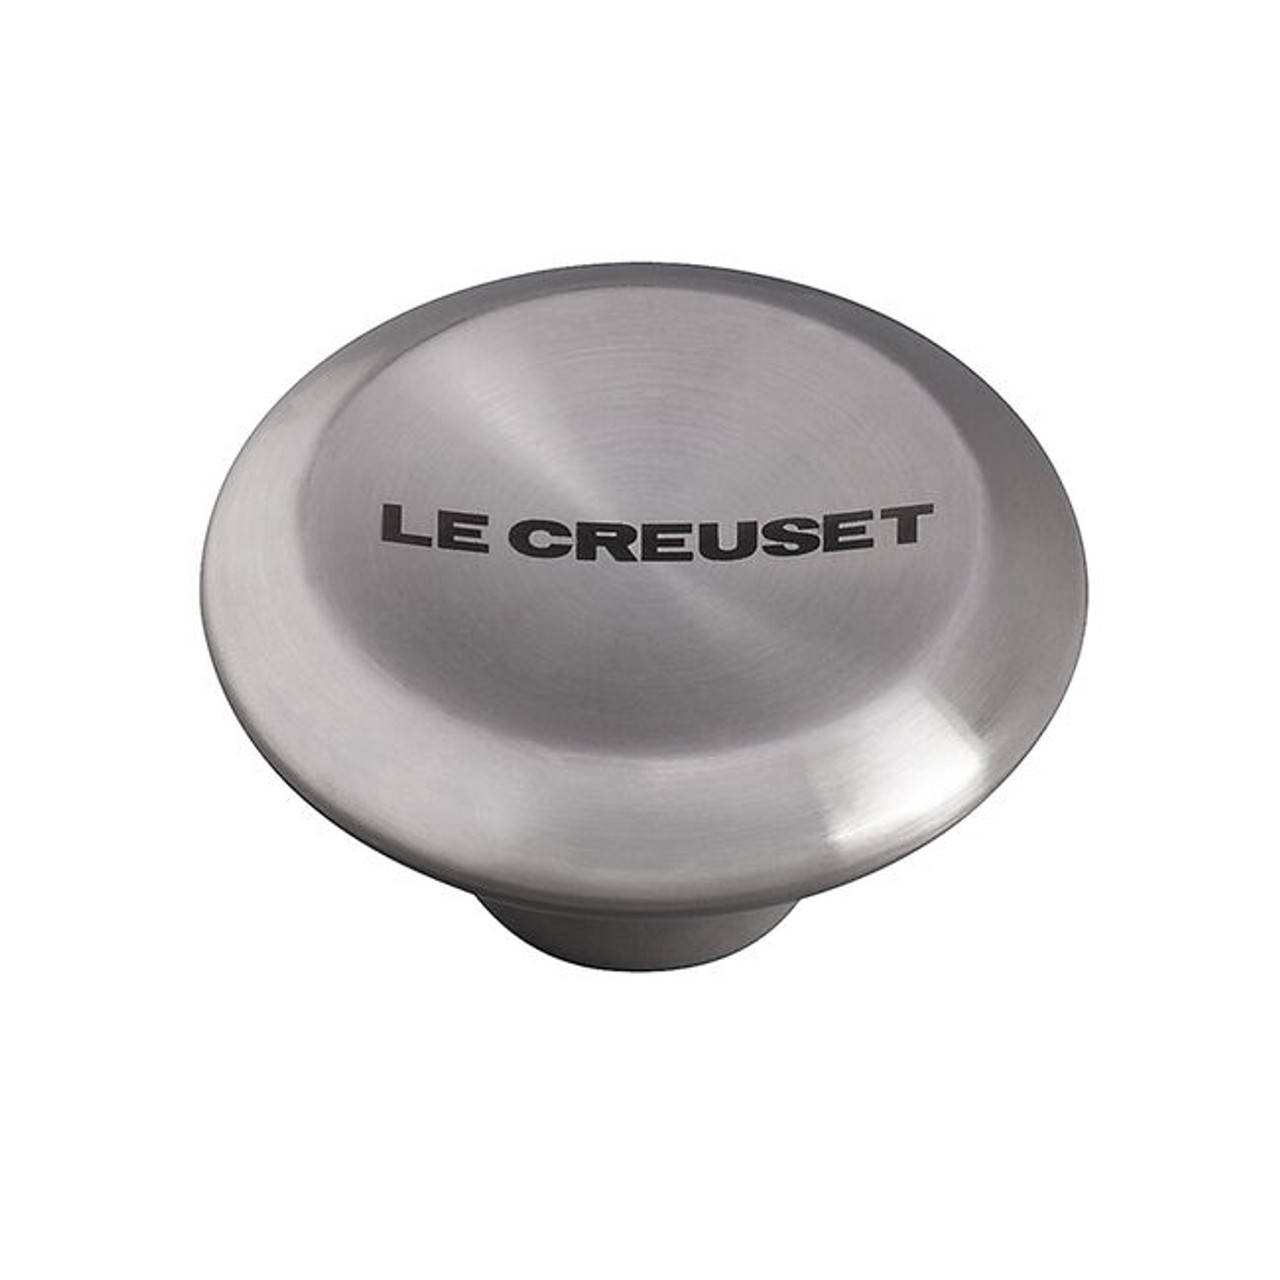 Le Signature Large Stainless Steel Cookware Knob Fante's - Since 1906